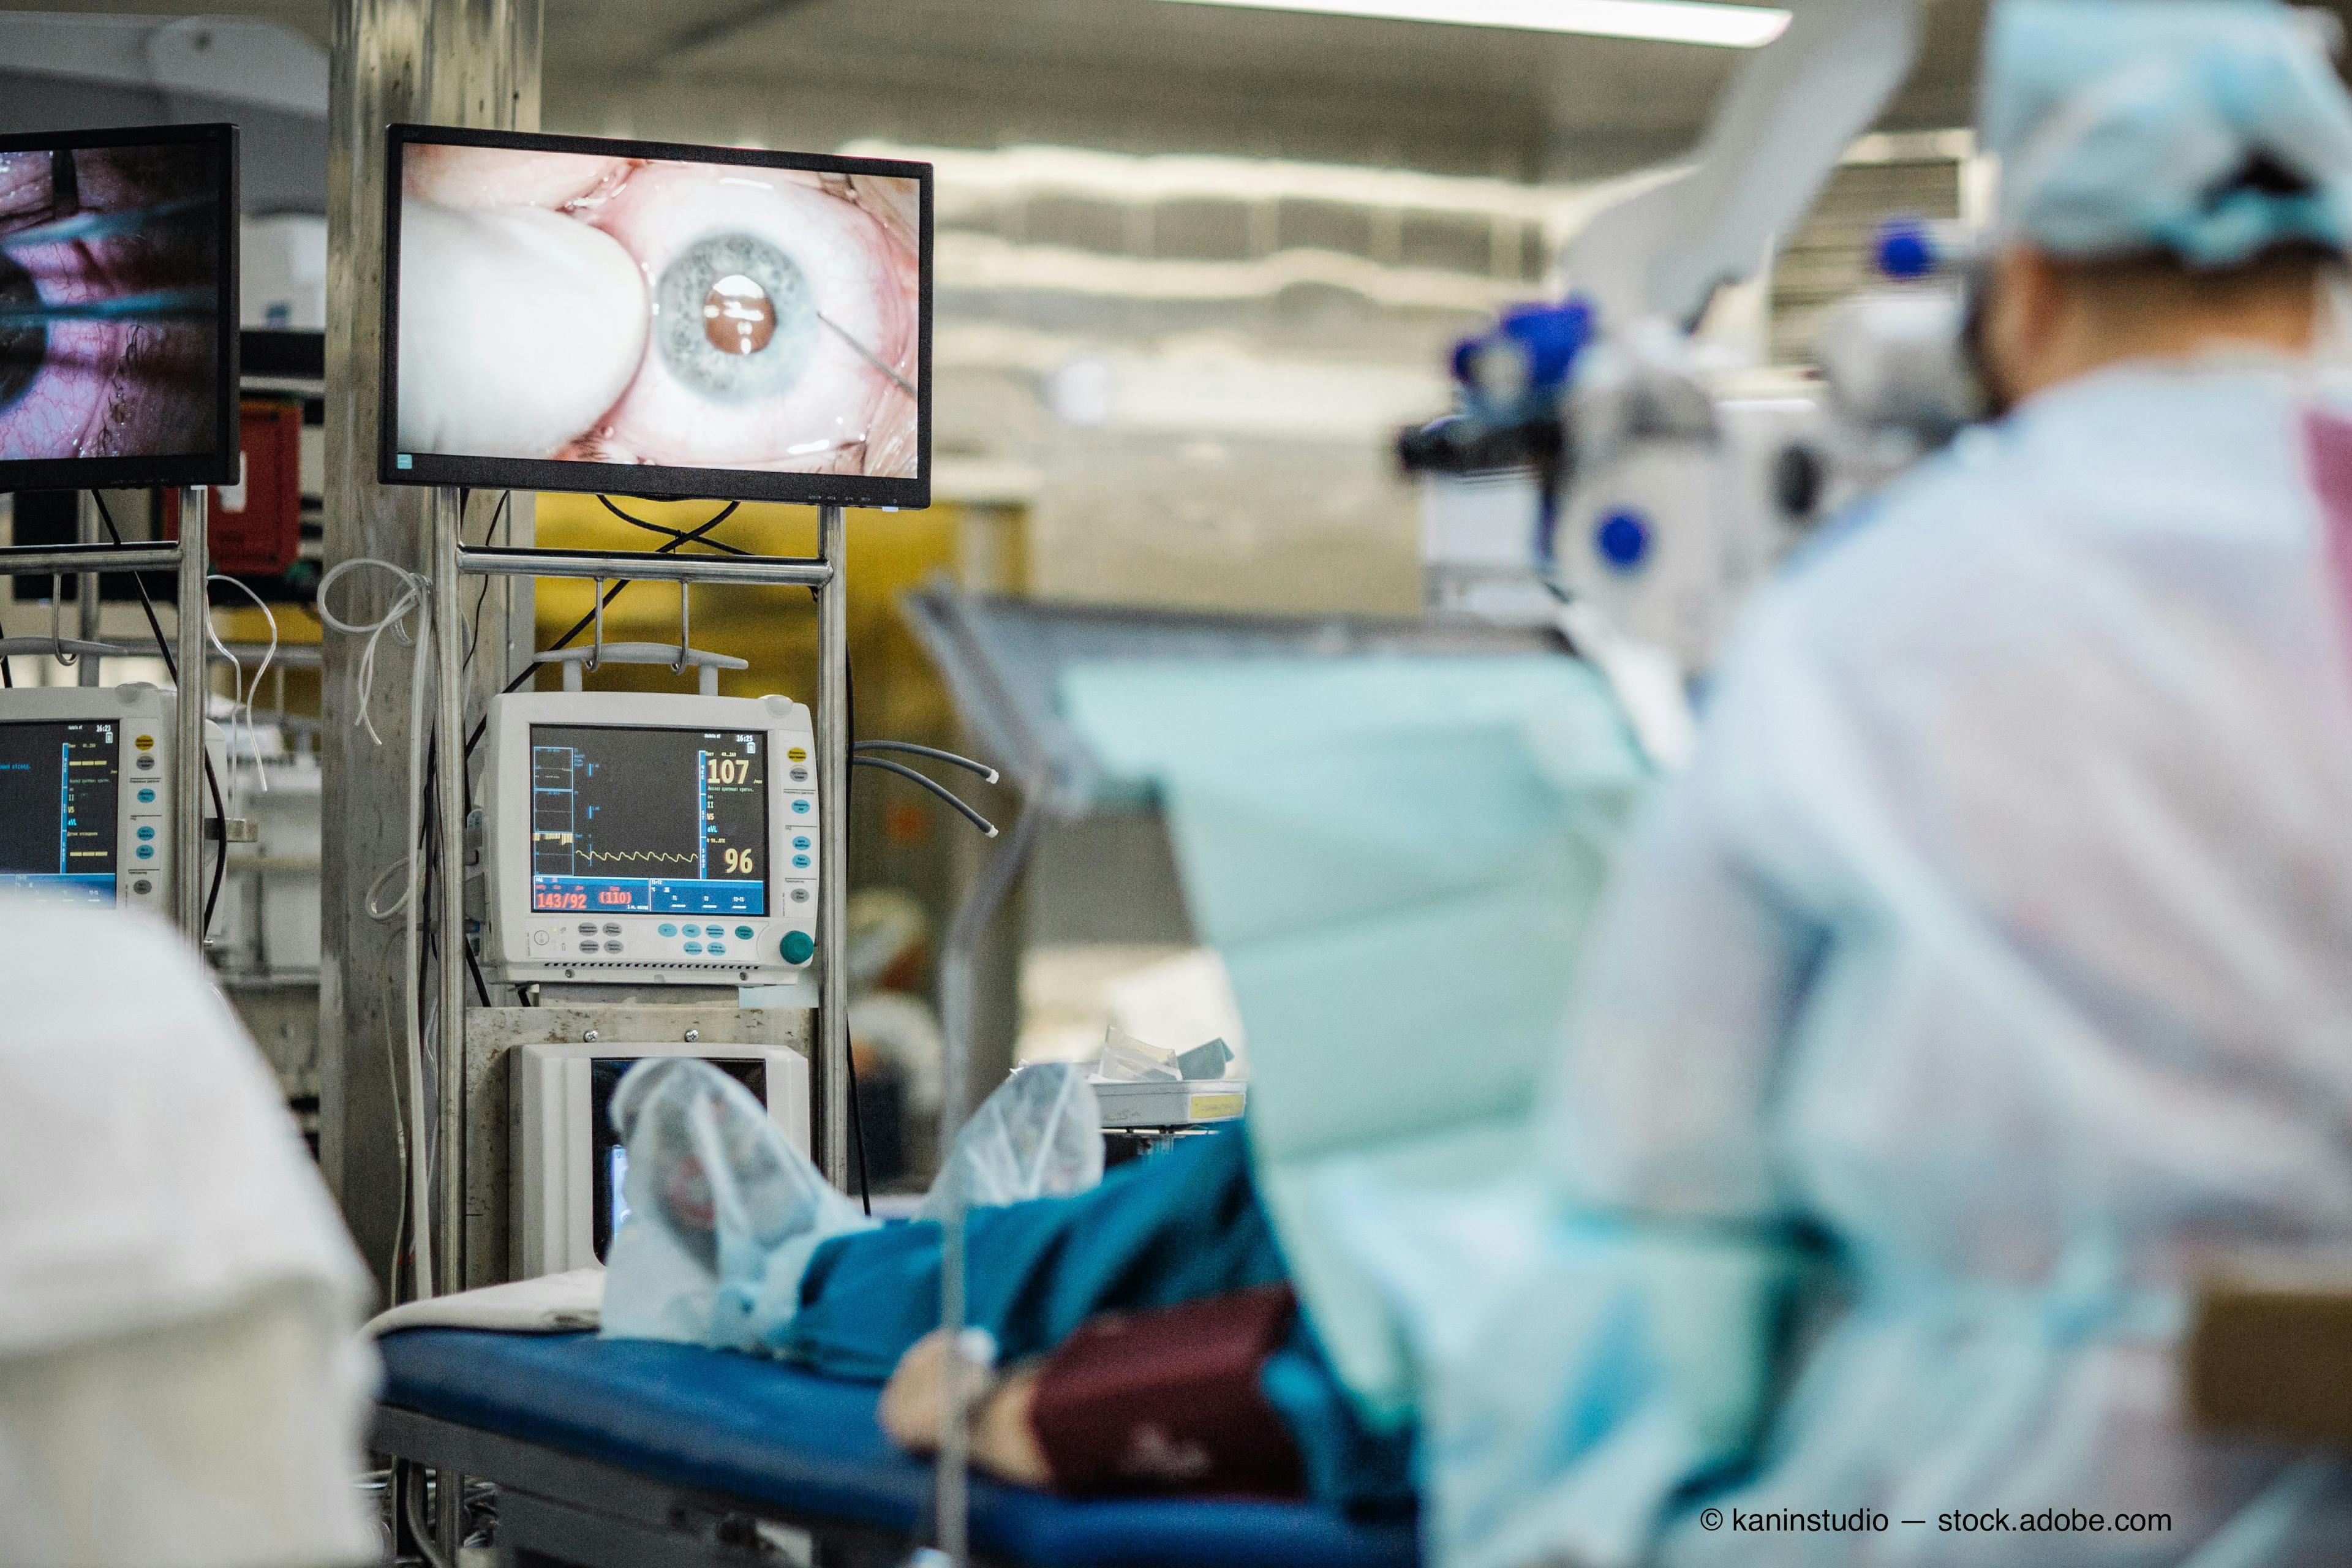 Improving surgical safety, efficiency, and outcomes for patients